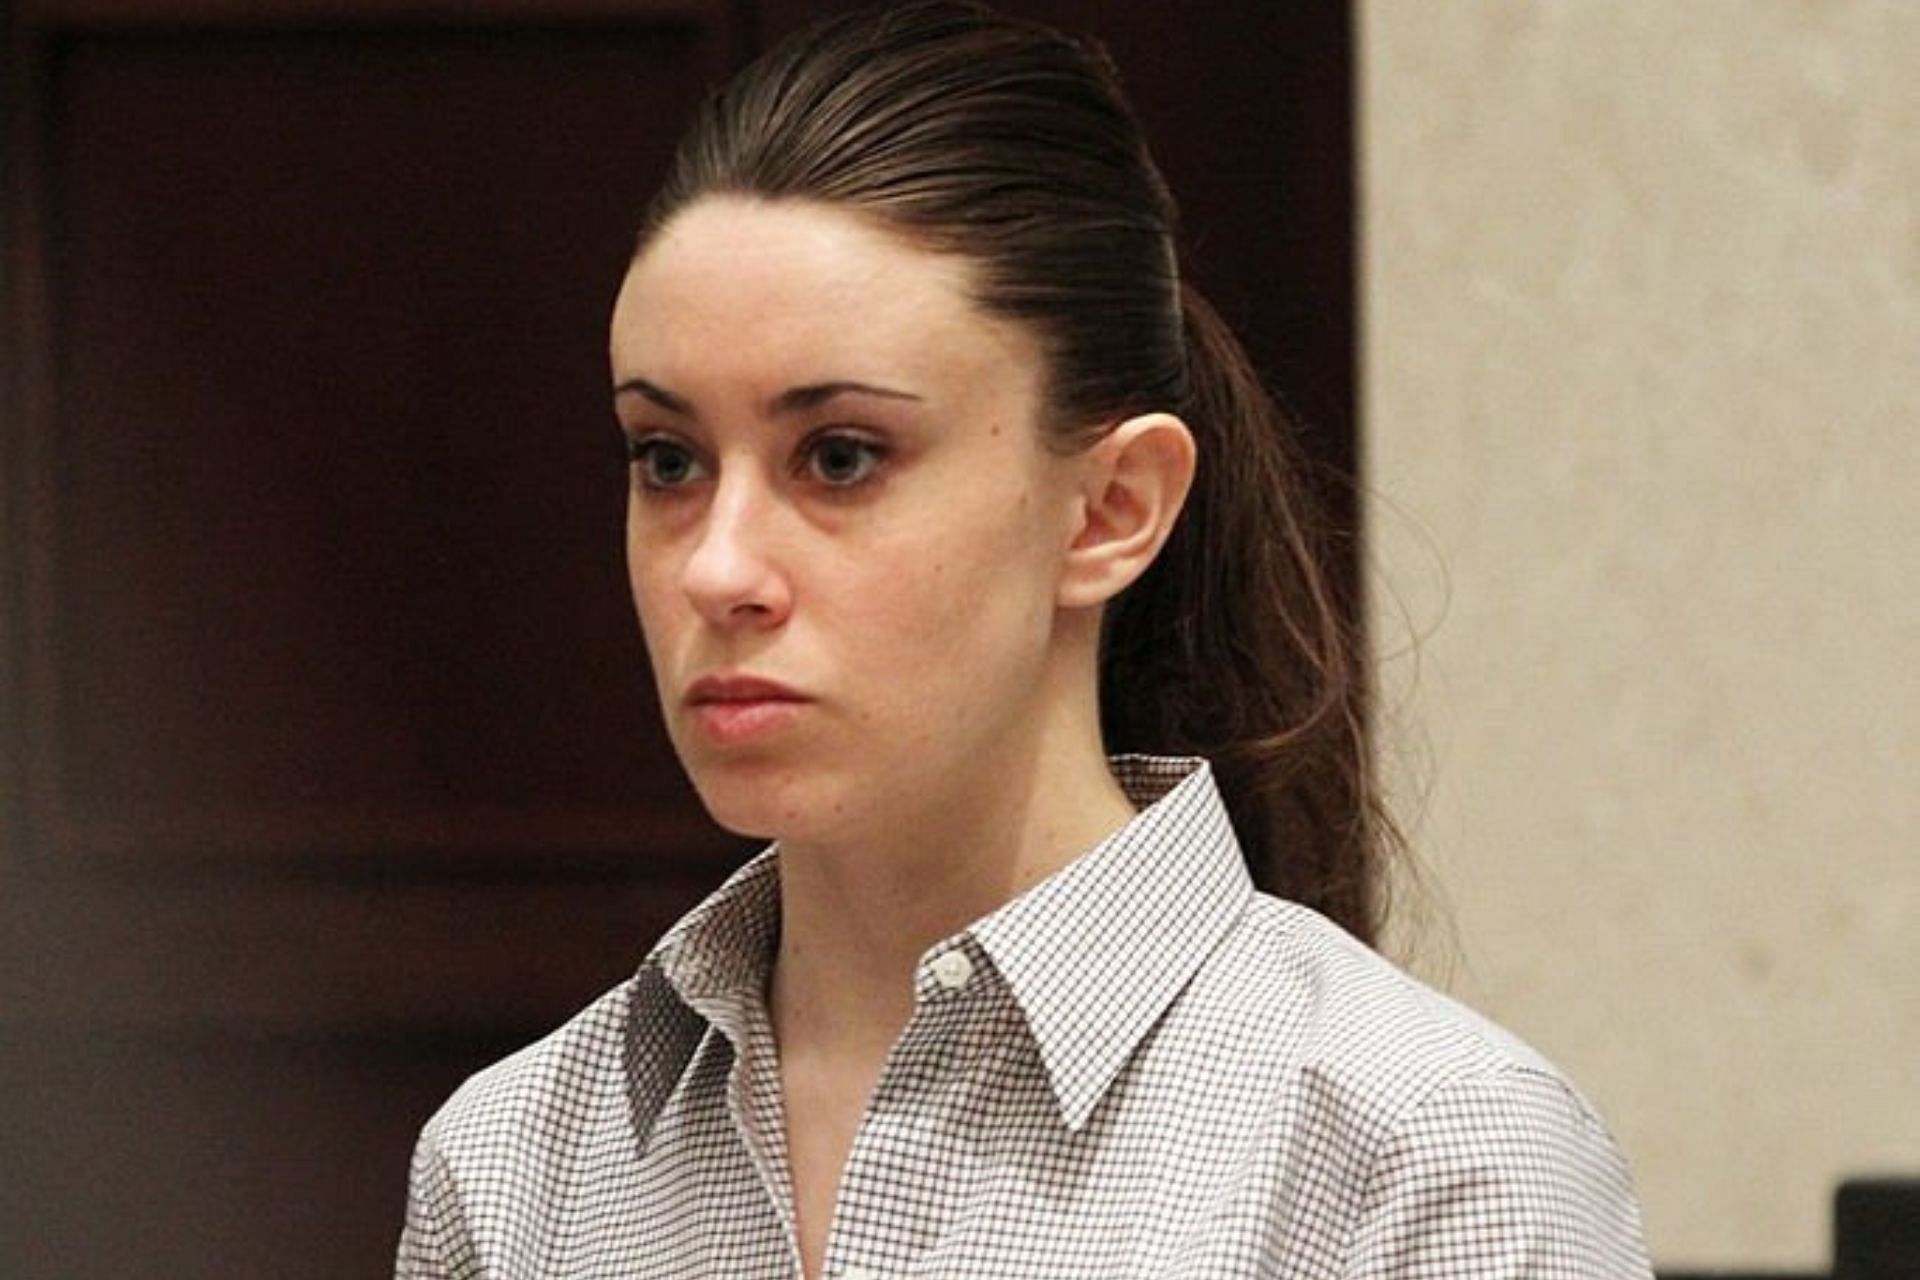 ID's Casey Anthony The Real Story Where is Casey Anthony today?